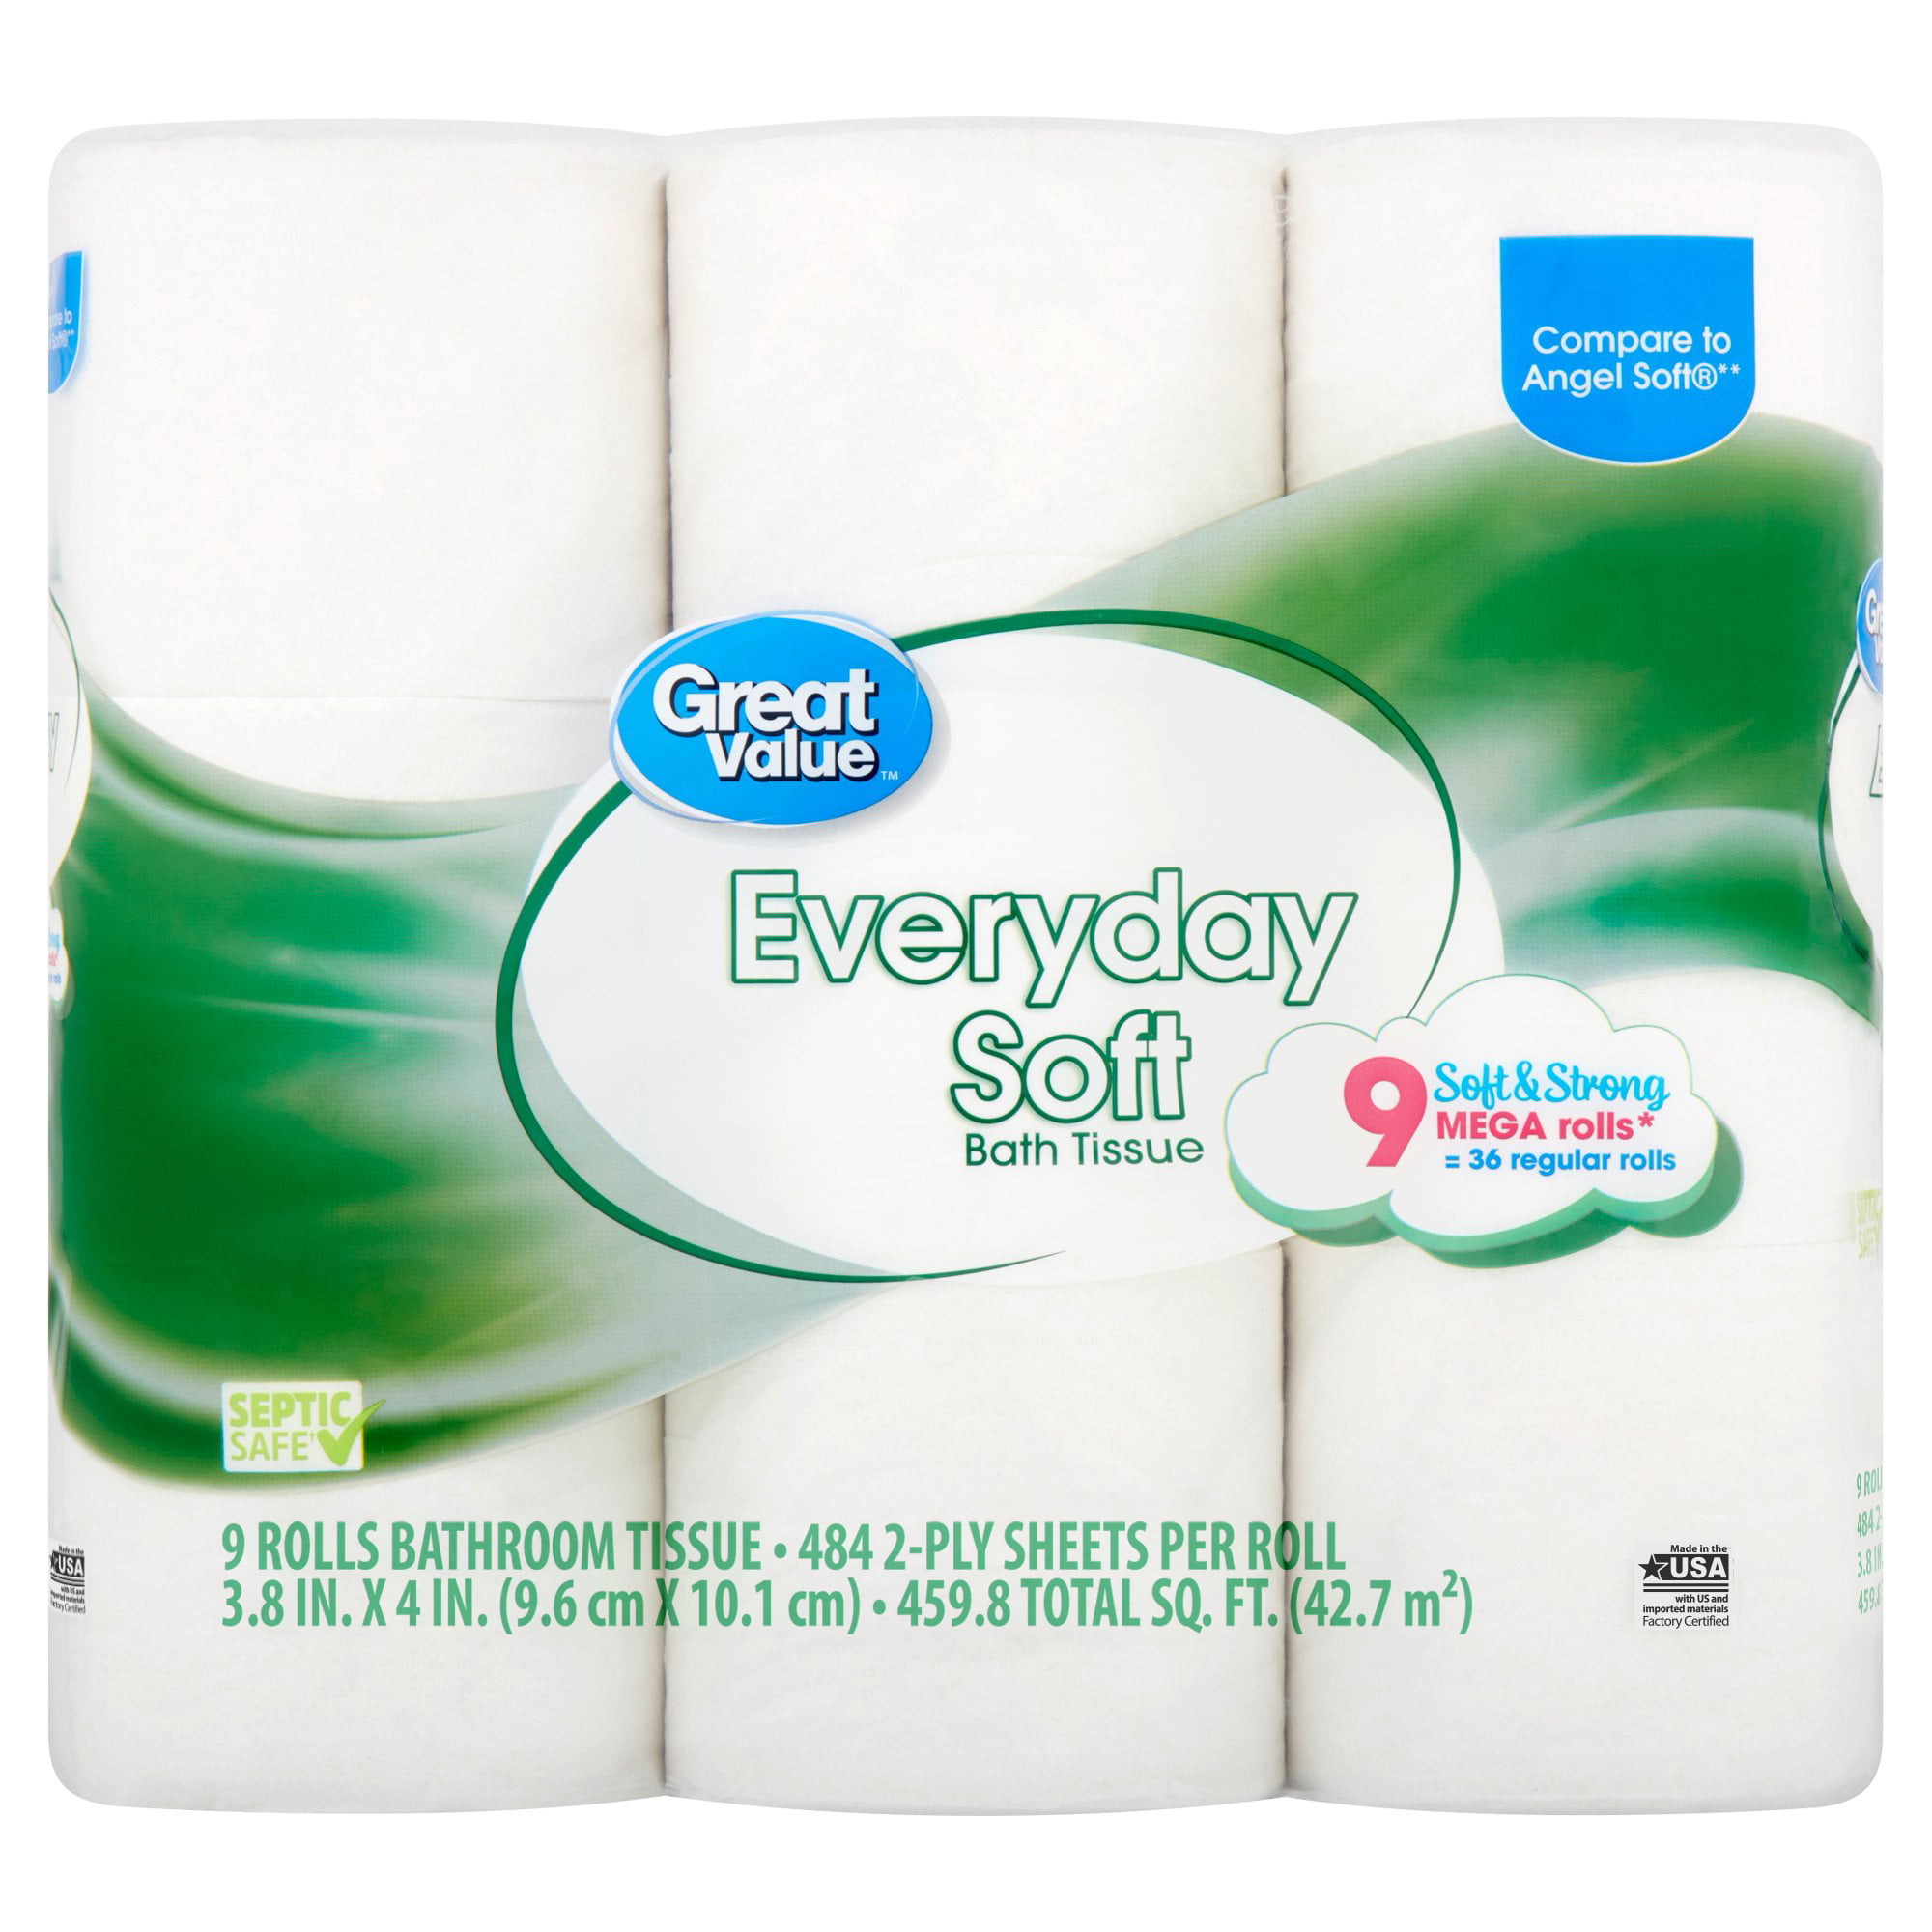 10+ best Prime Day deals on household essentials: Toilet paper, toothpaste  and more